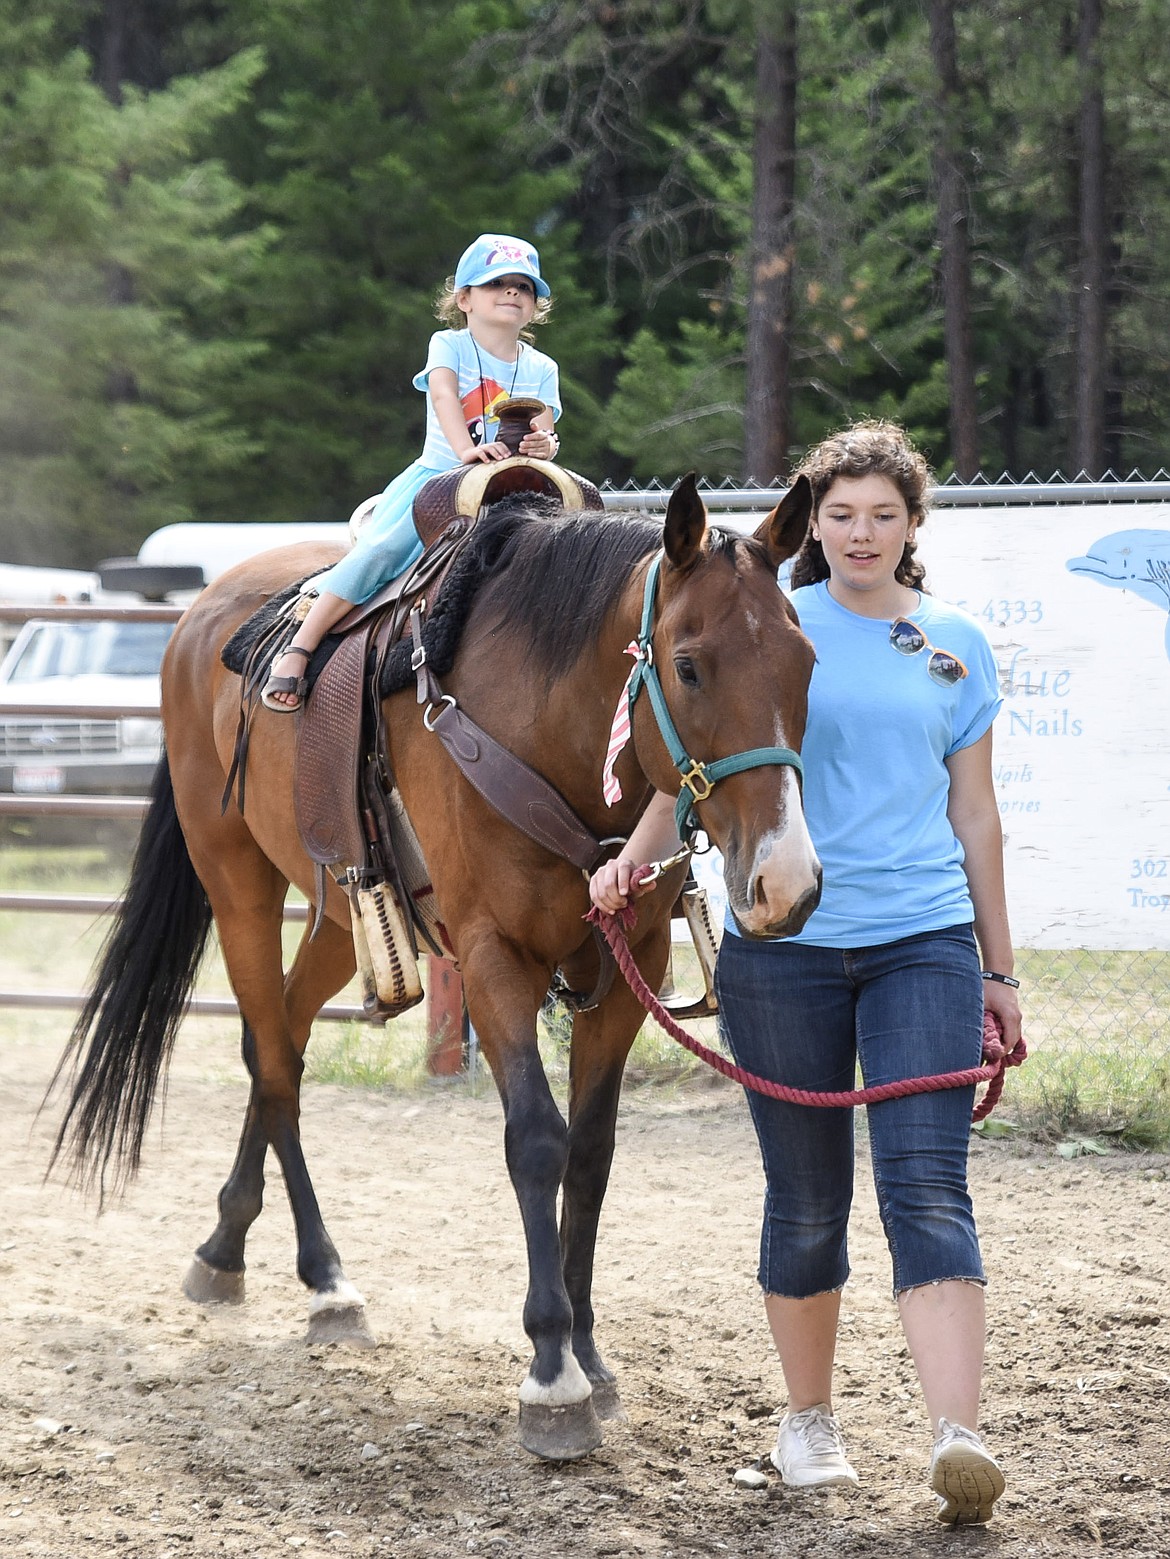 Kylee McKinney takes a horse ride as Lanae Vistica guides, at the Three Lakes Roundup, put on by Three Lakes Community Bible Church, Saturday. (Ben Kibbey/The Western News)